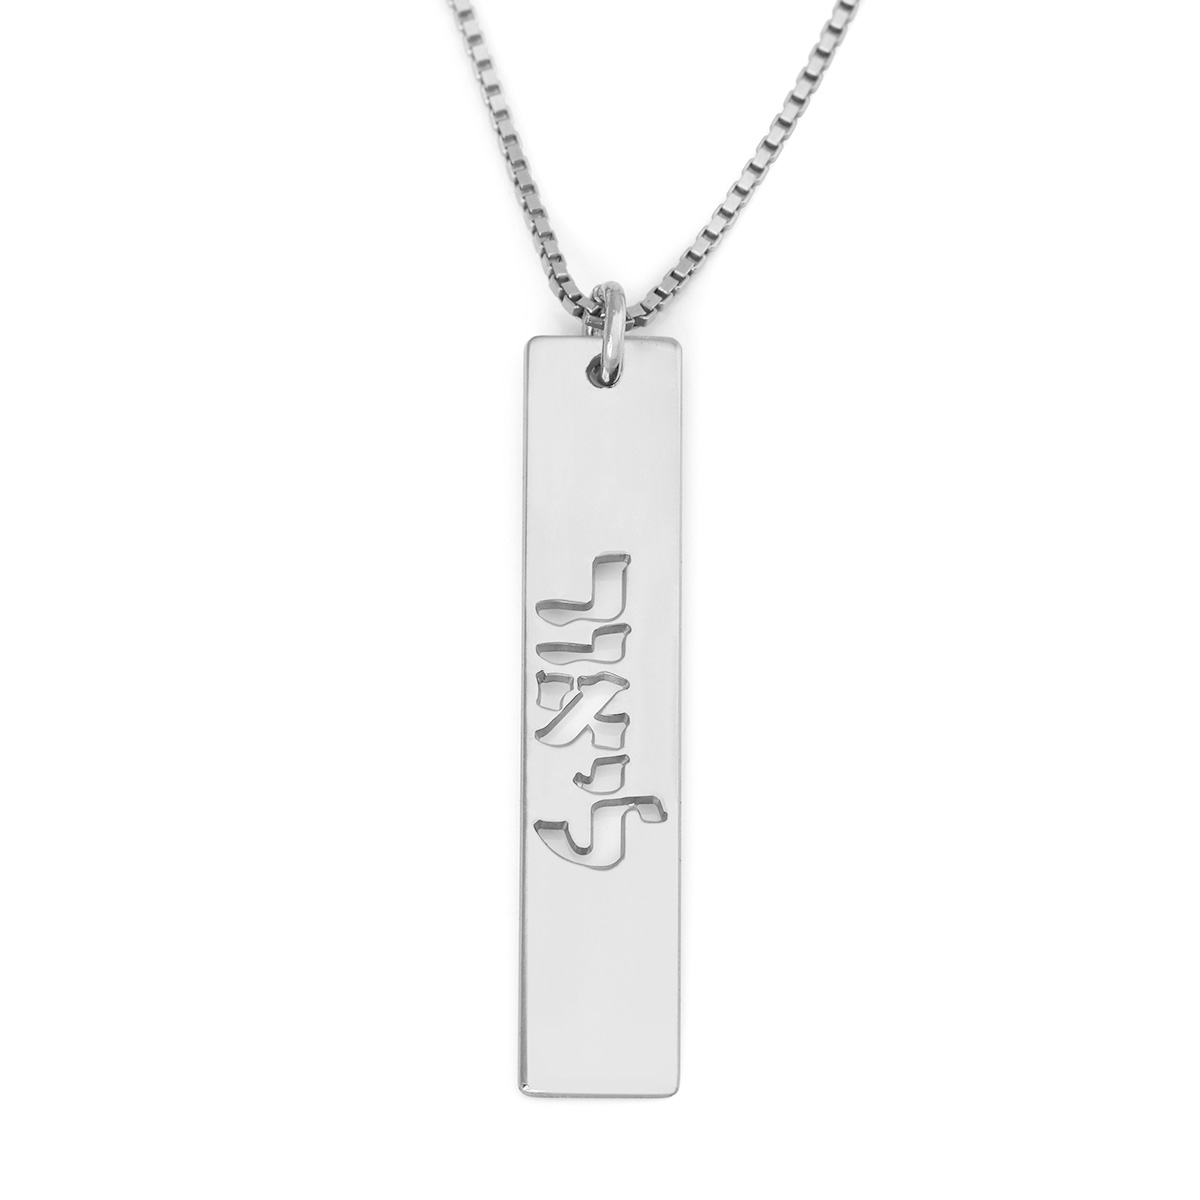 Sterling Silver or Gold Plated Vertical Bar Name Necklace - 1